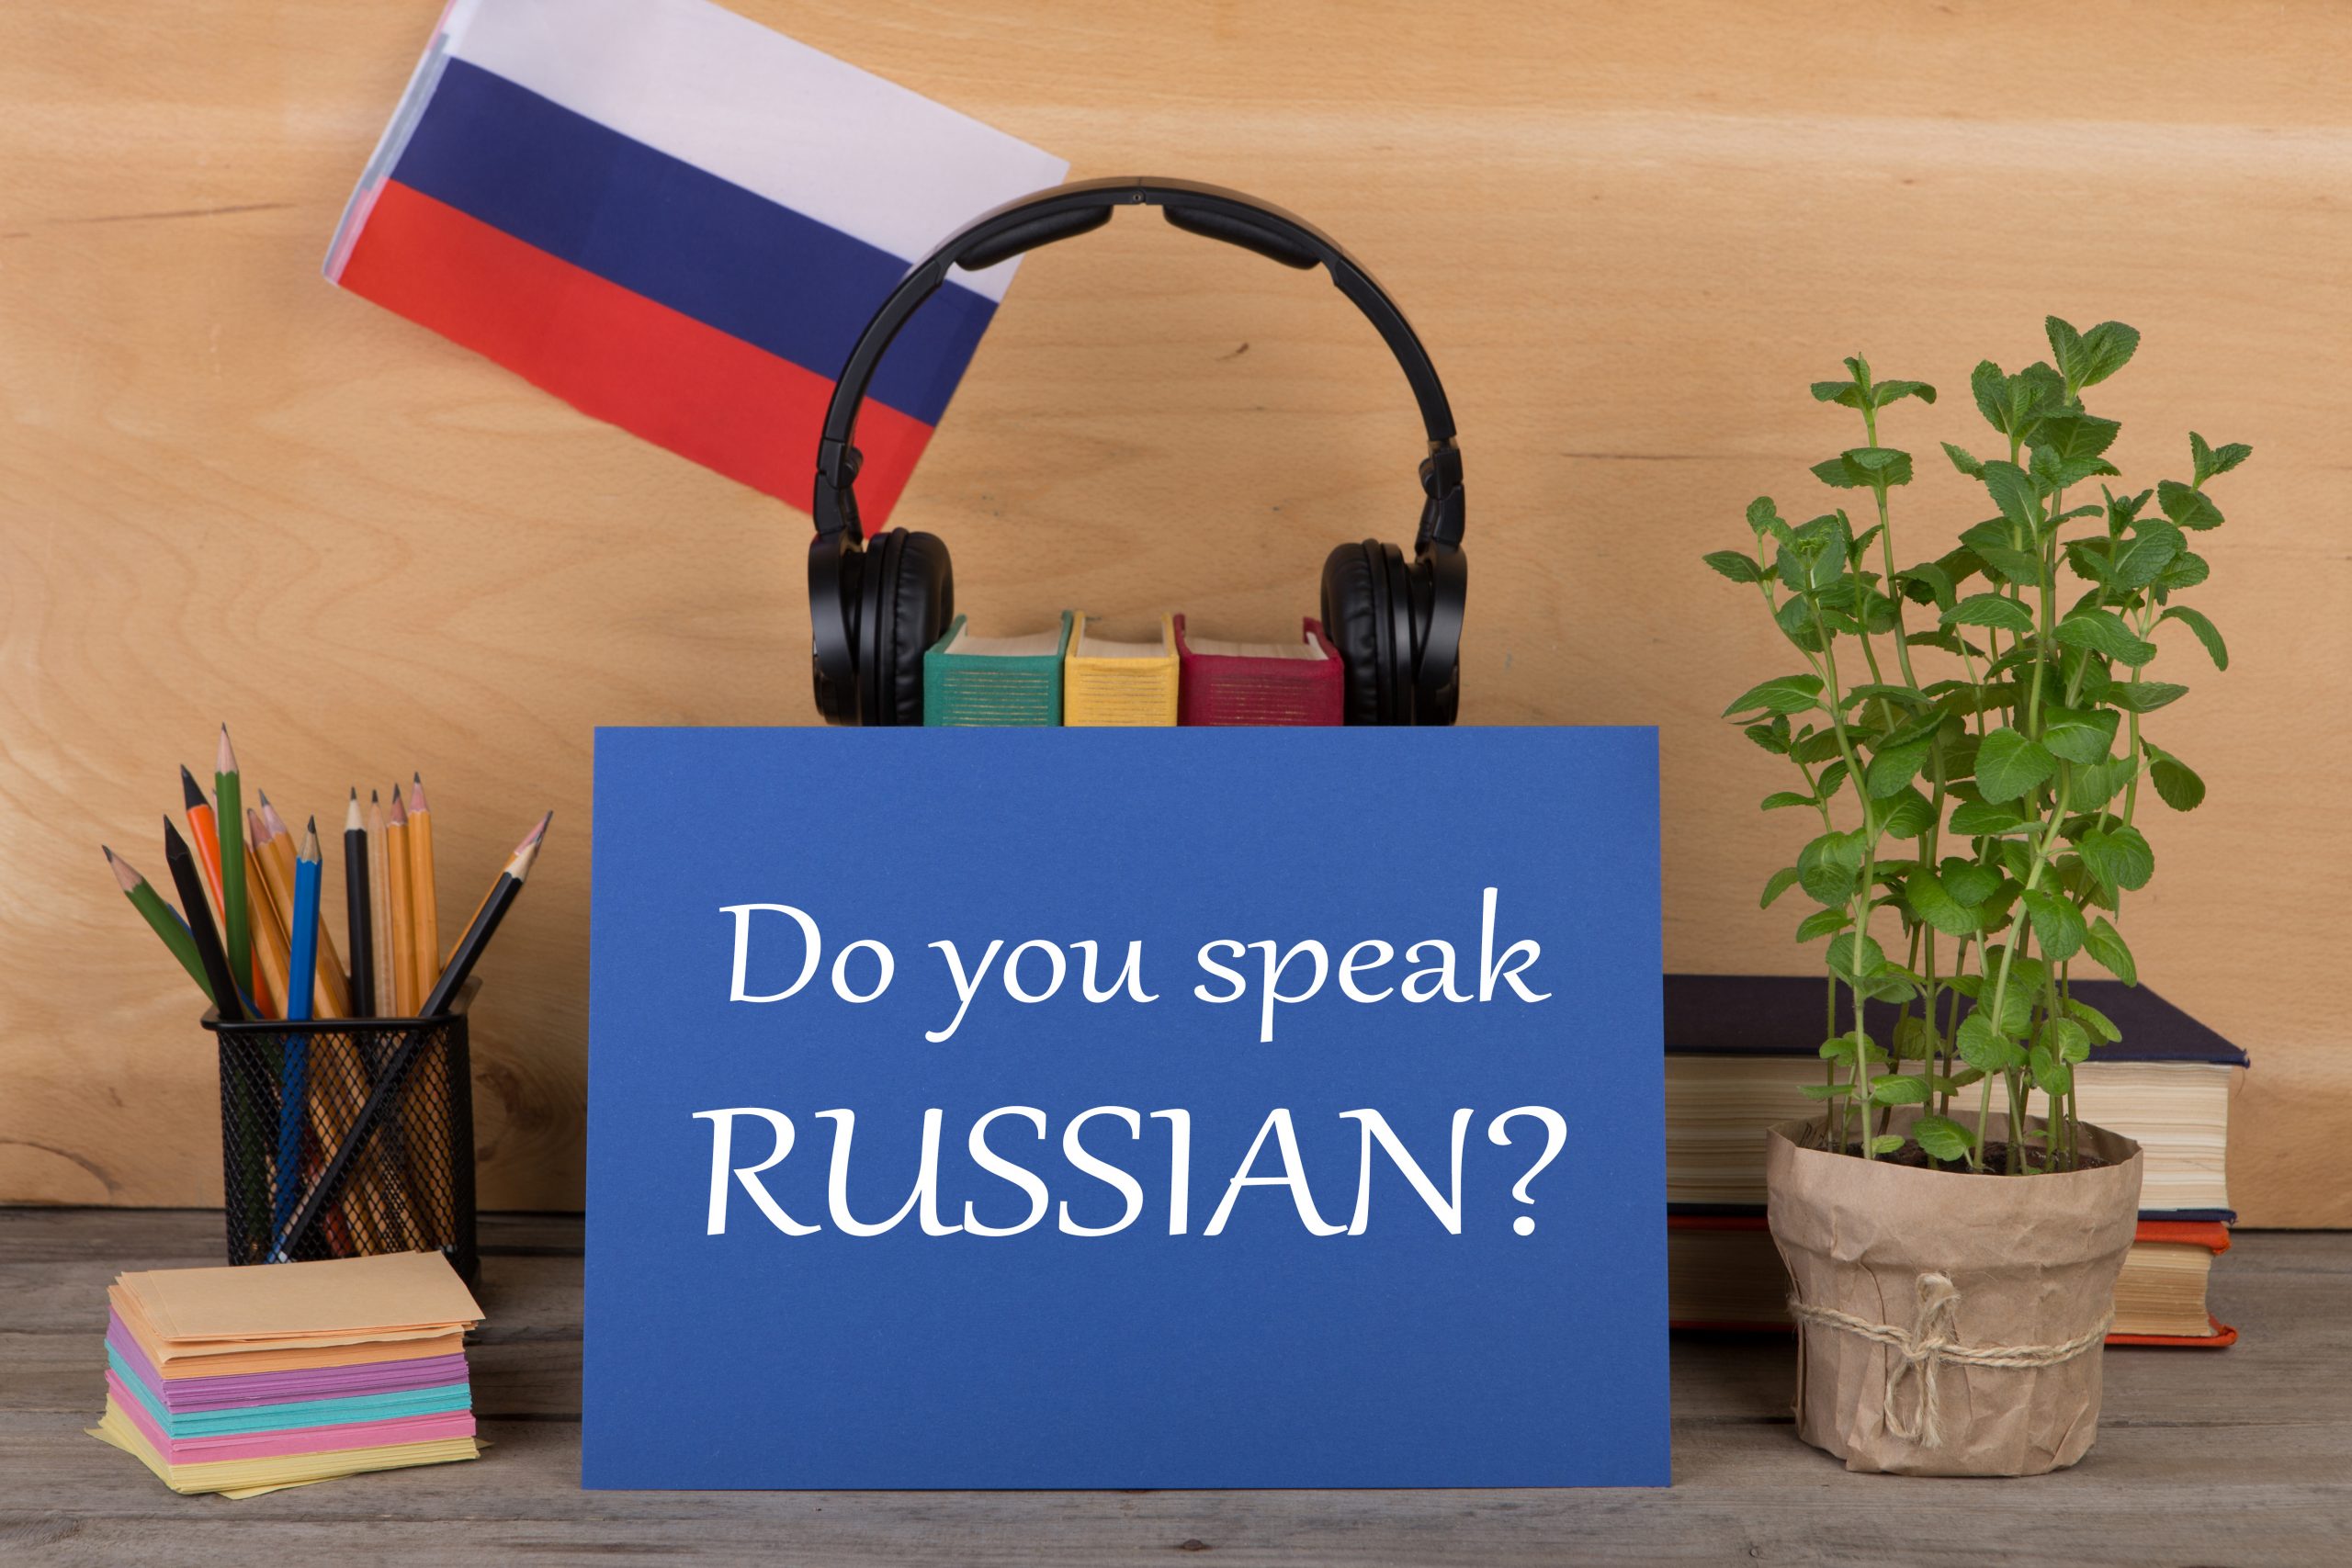 Sign in front of headphones and a flag says: "Do you speak Russian?"